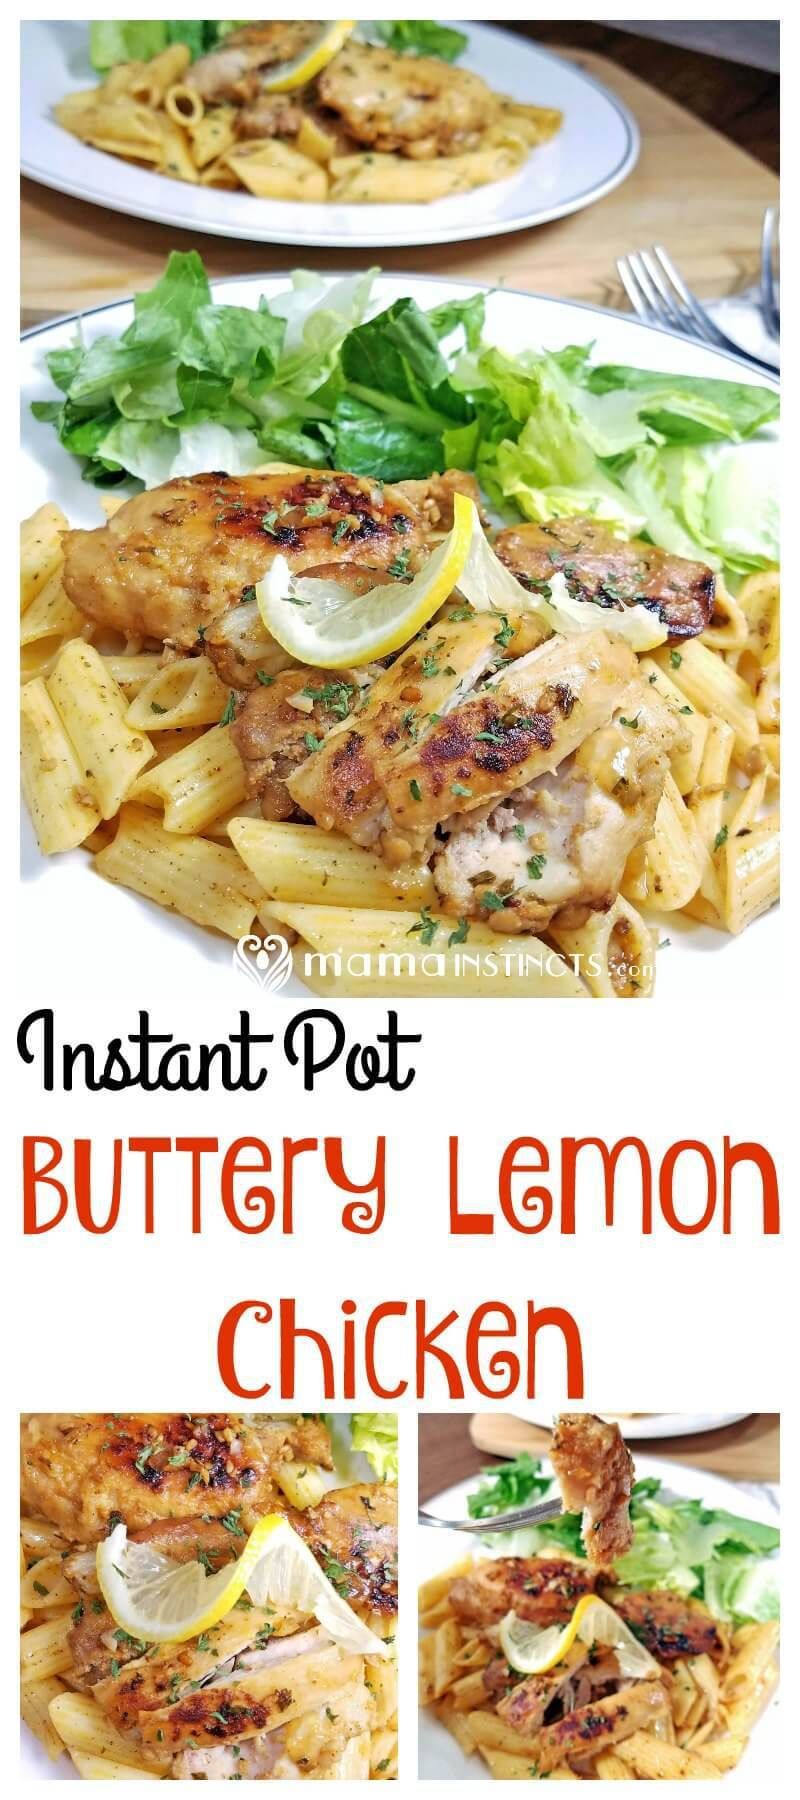 Who doesn’t love lemon and butter? Try this delicious and easy instant pot buttery lemon chicken over rice, chicken or with a side